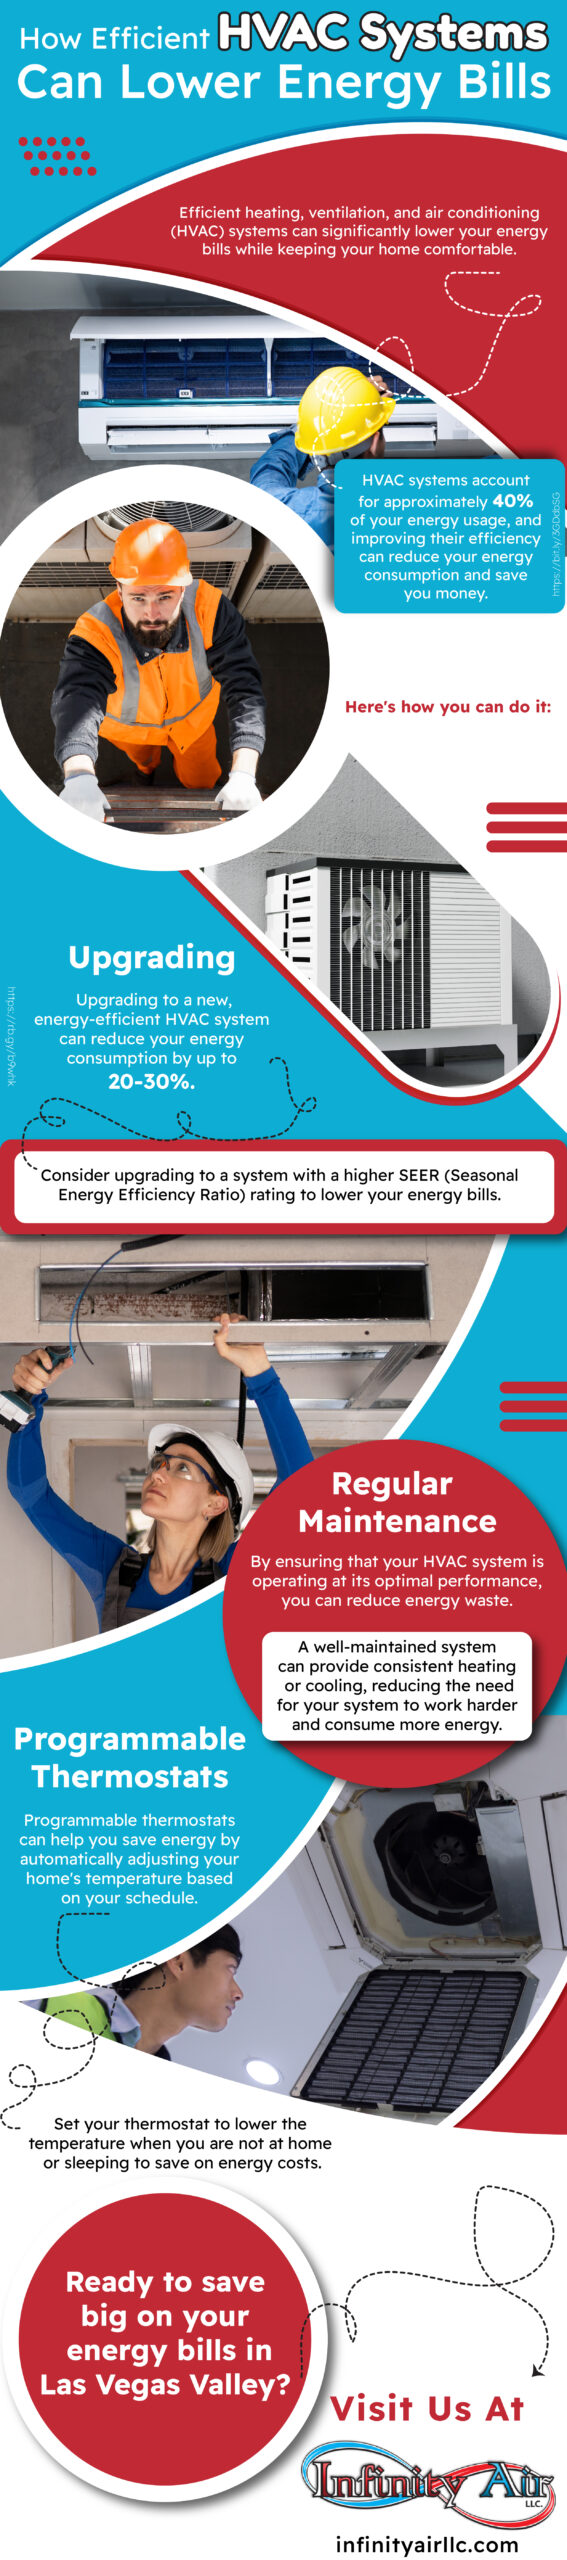 How Efficient HVAC Systems Can Lower Energy Bills Infograph